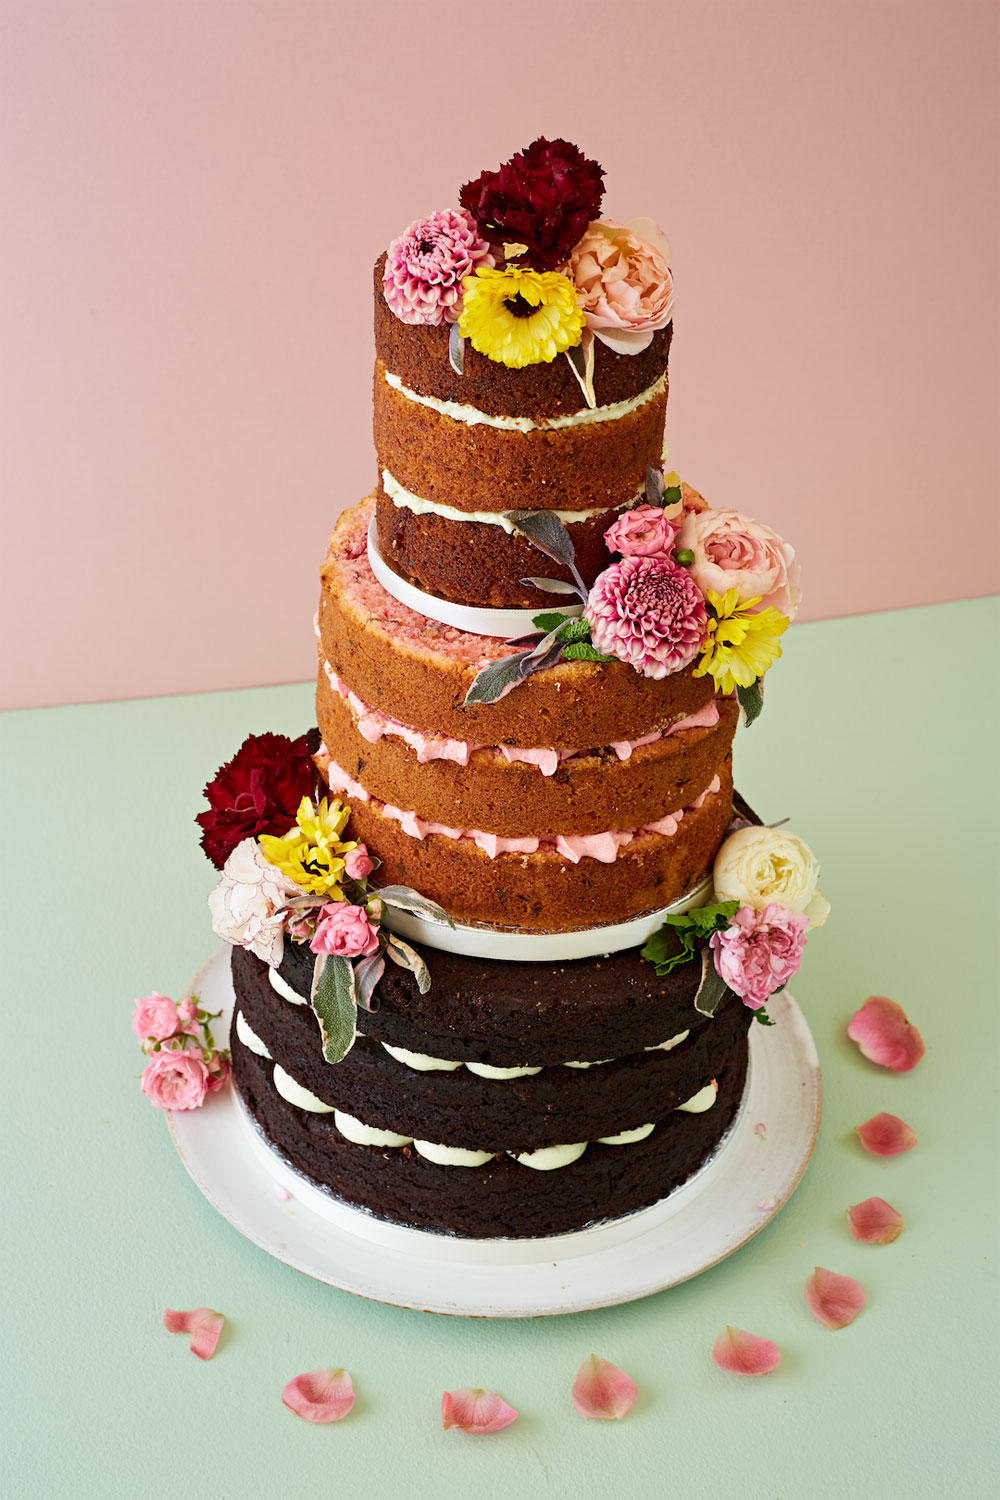 How To Decorate A Wedding Celebration Cake With Edible